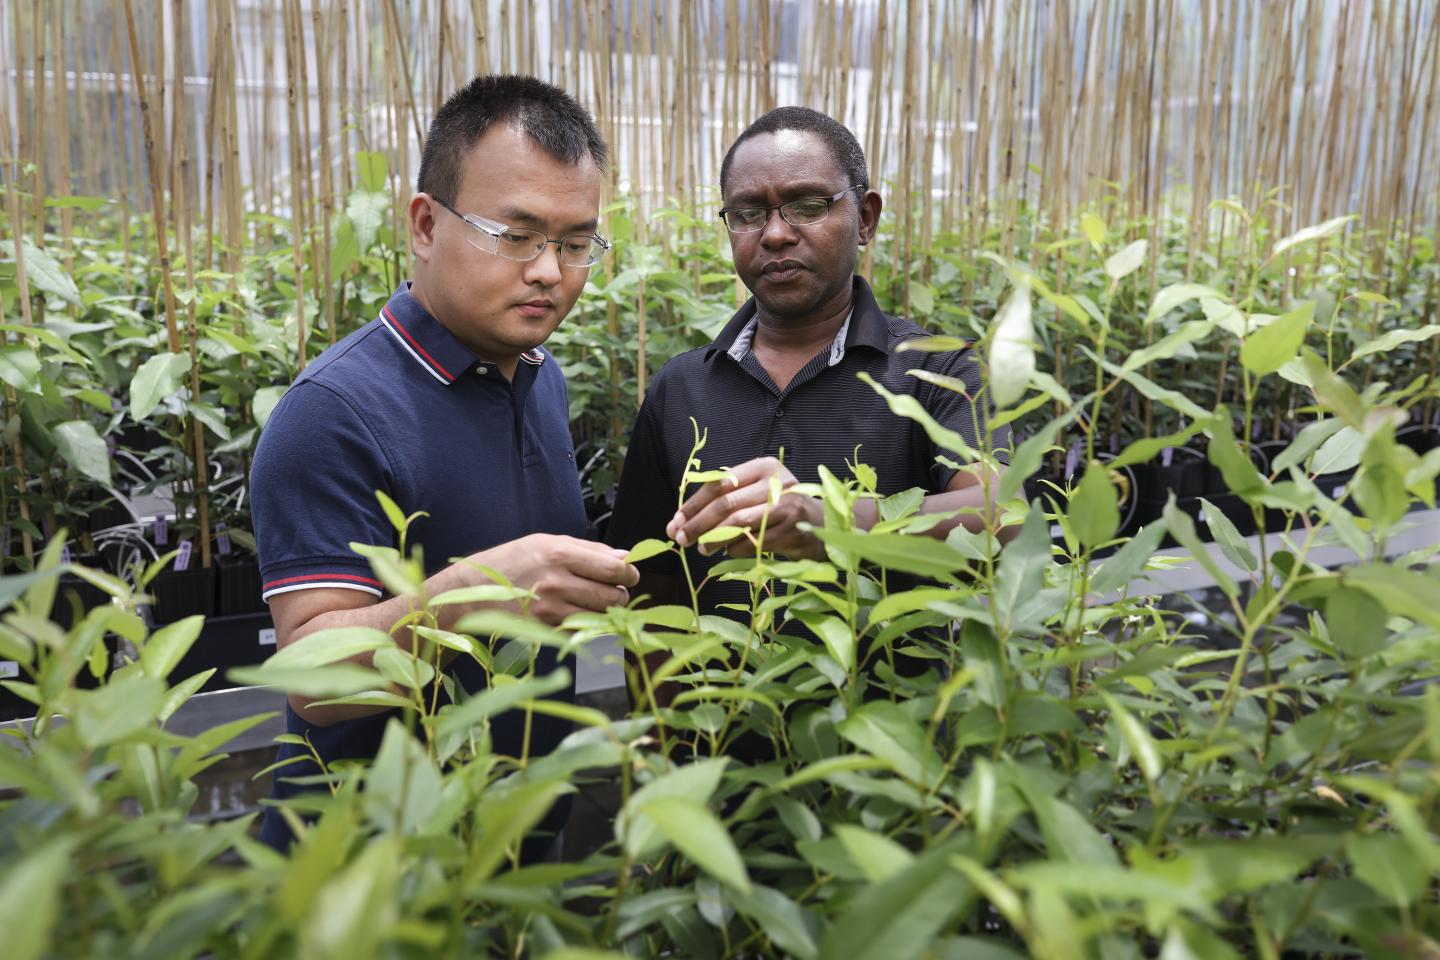 Critical Plant Gene Takes Unexpected Detour that Could Boost Biofuel Yields (1 of 2)